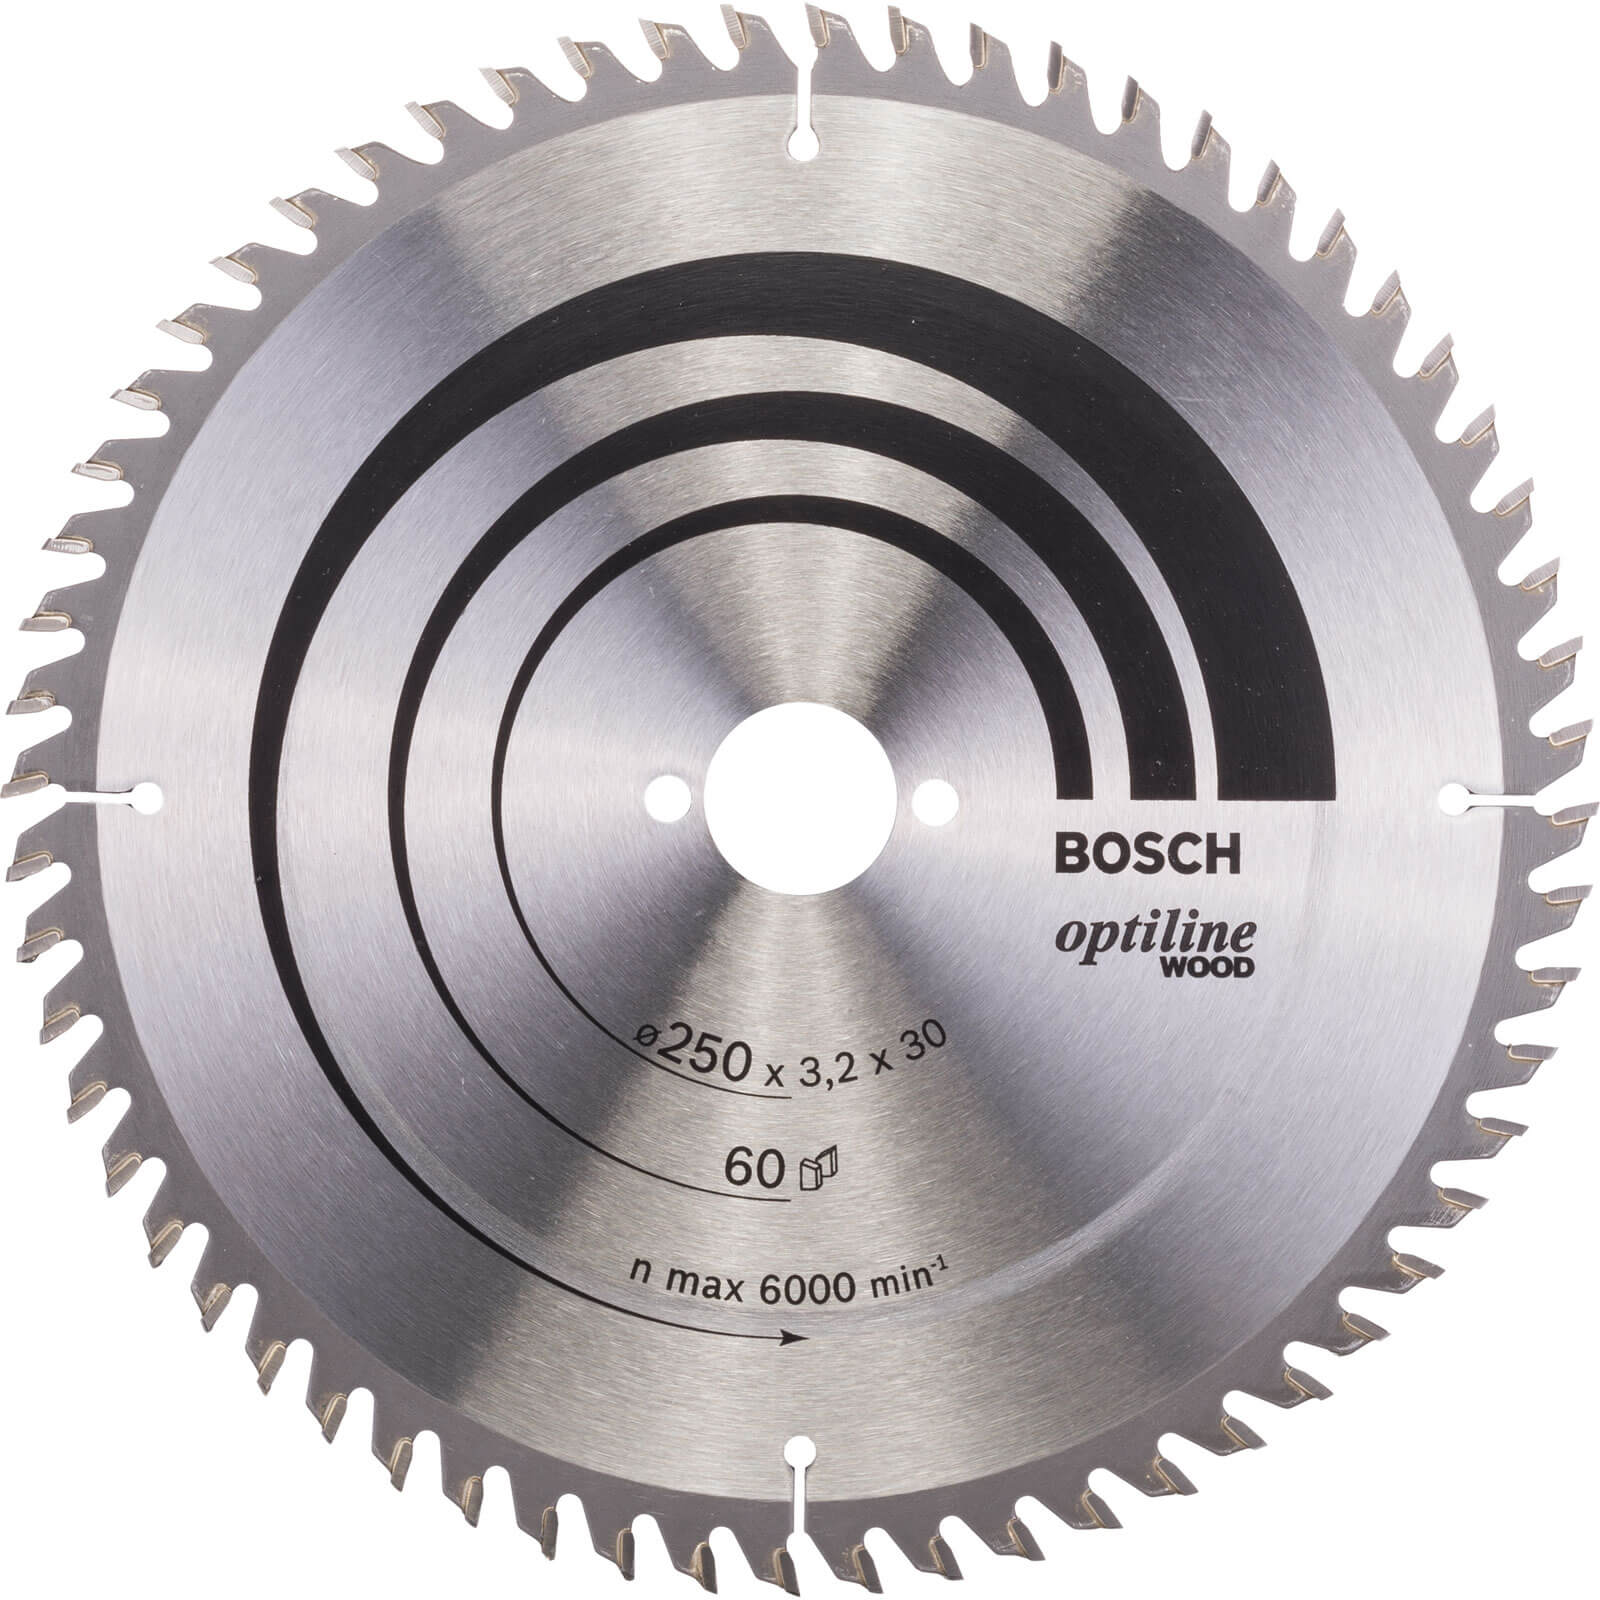 Photo of Bosch Optiline Wood Cutting Table Saw Blade 250mm 60t 30mm